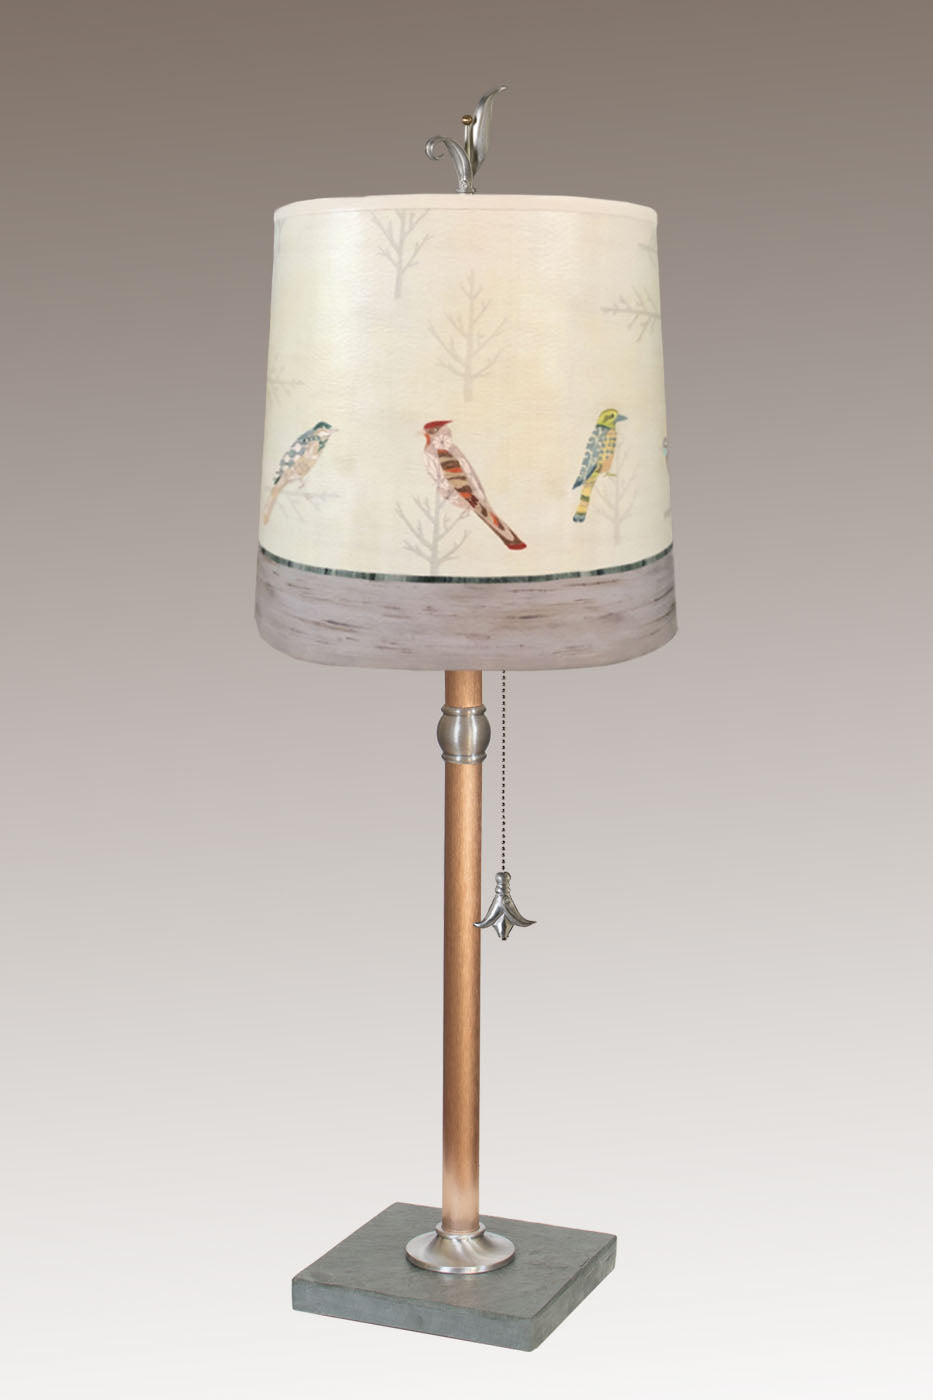 Copper Table Lamp with Medium Drum Shade in Bird Friends